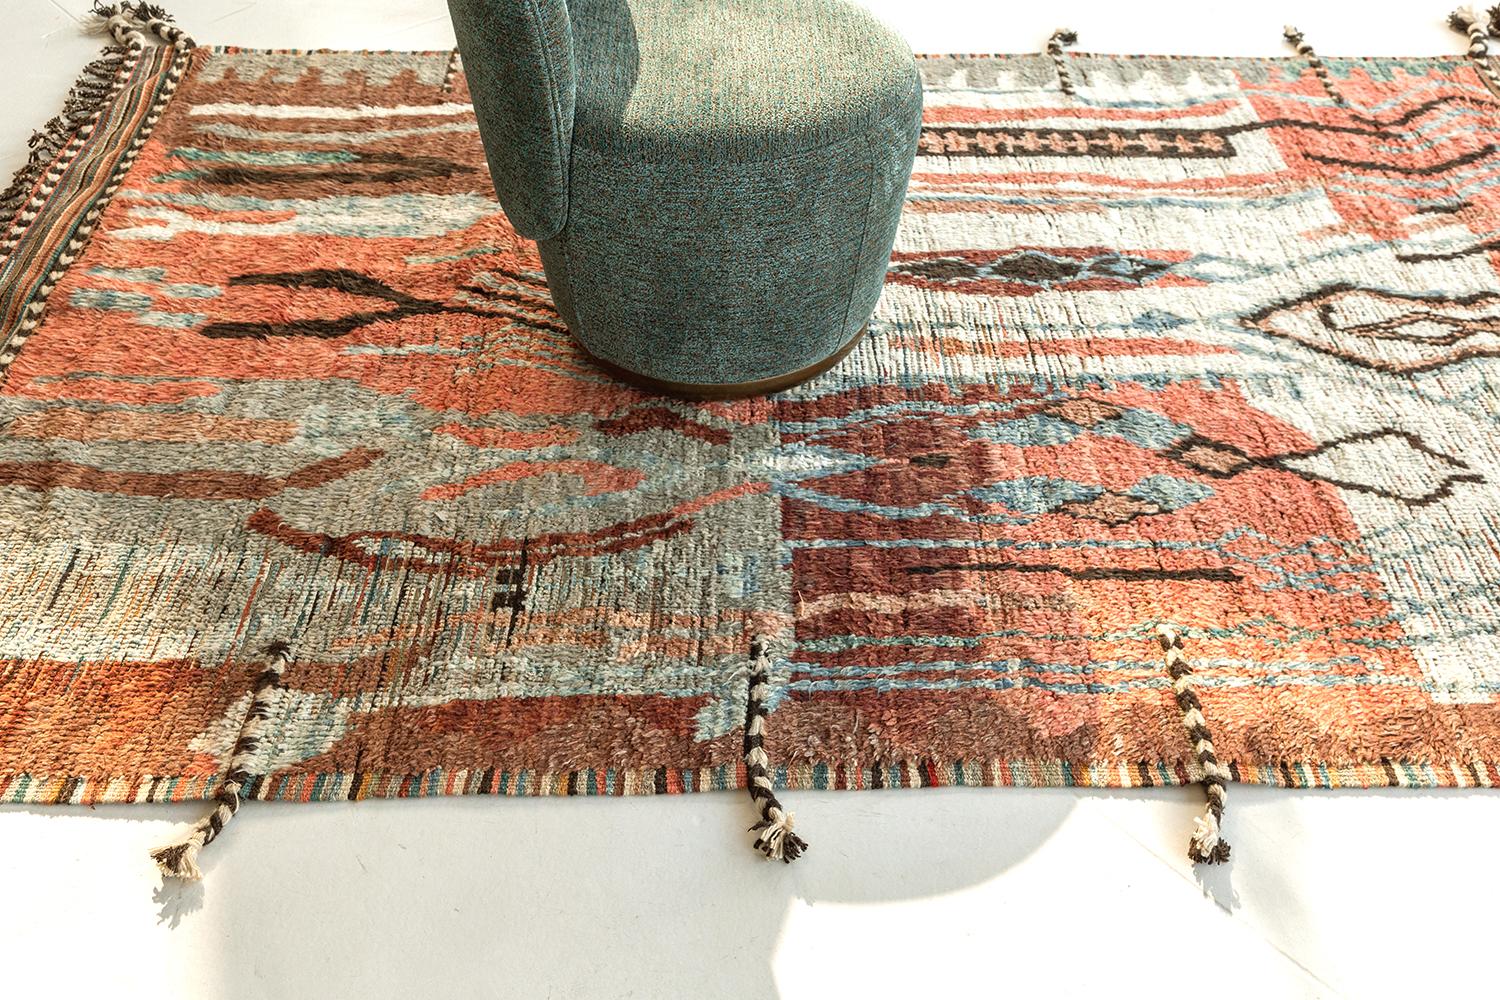 Rikasa is a luxurious wool with amorphous shapes in subtle gradations of charcoal, ivory, and cream. Its embossed handwoven wool features a series of free-spirited rugs that feels innately soft underfoot and is enhanced by extraordinary, valiant